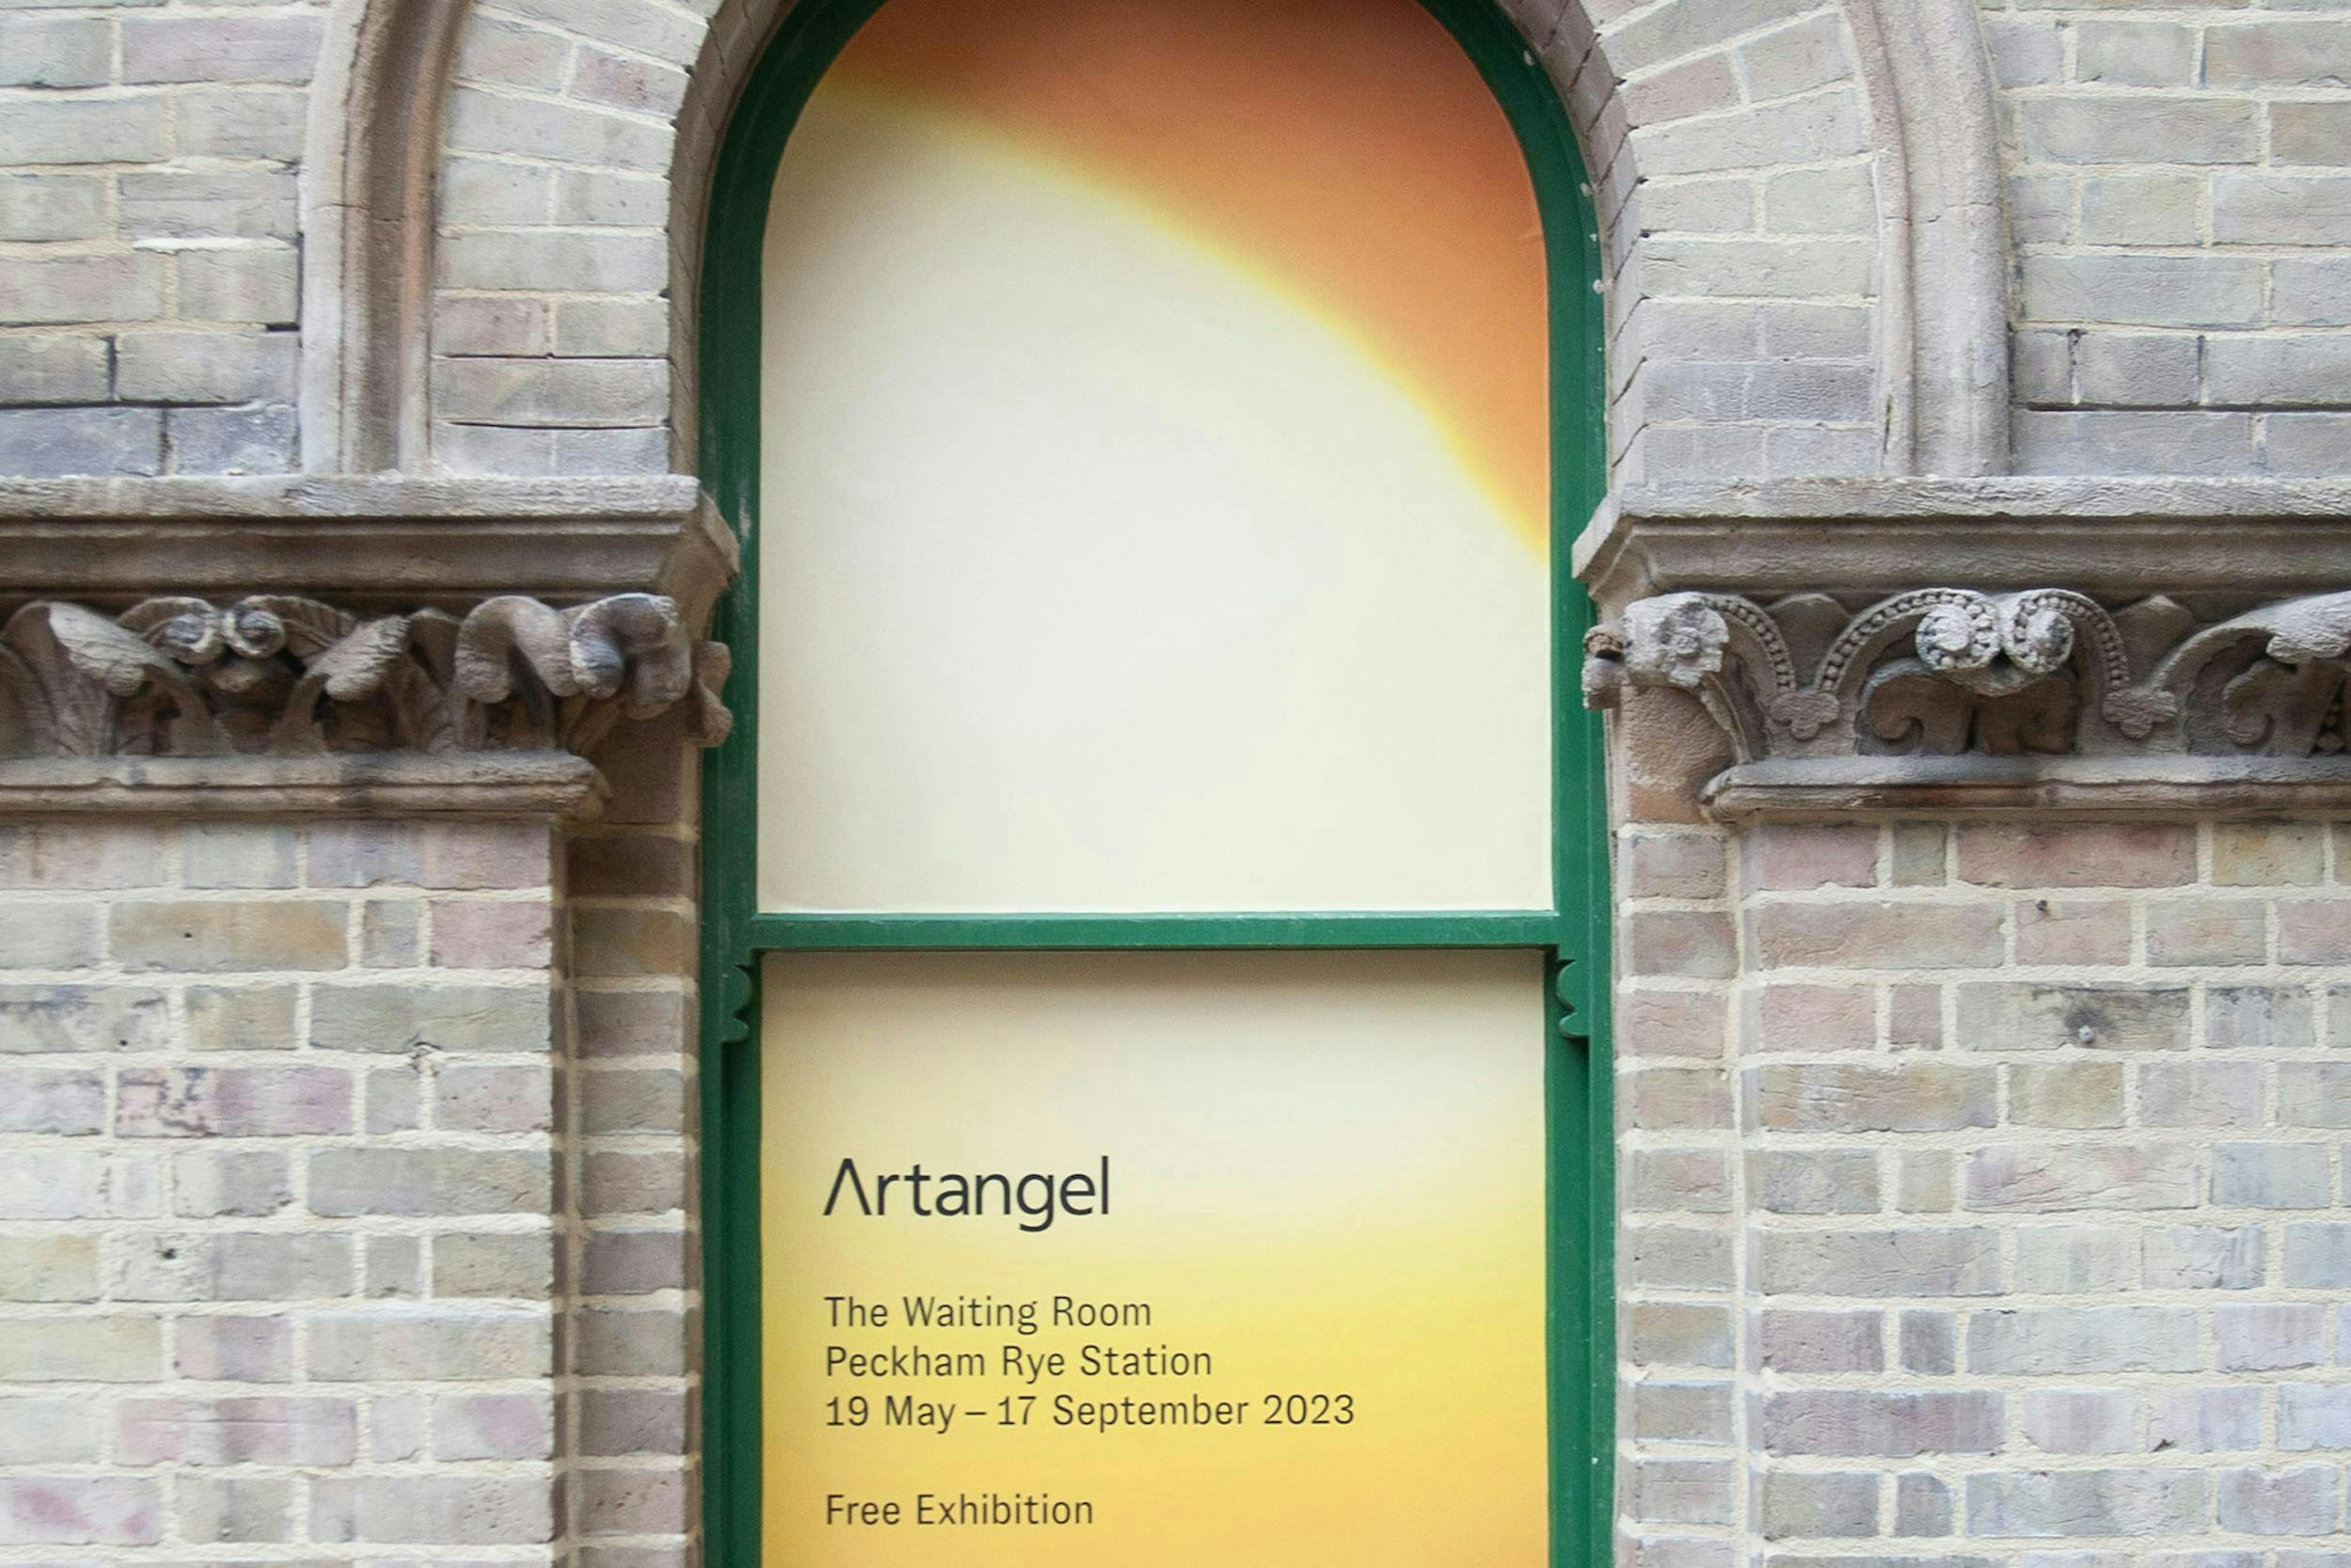 An arched window in an old brick building, the window has a yellow vinyl and text 